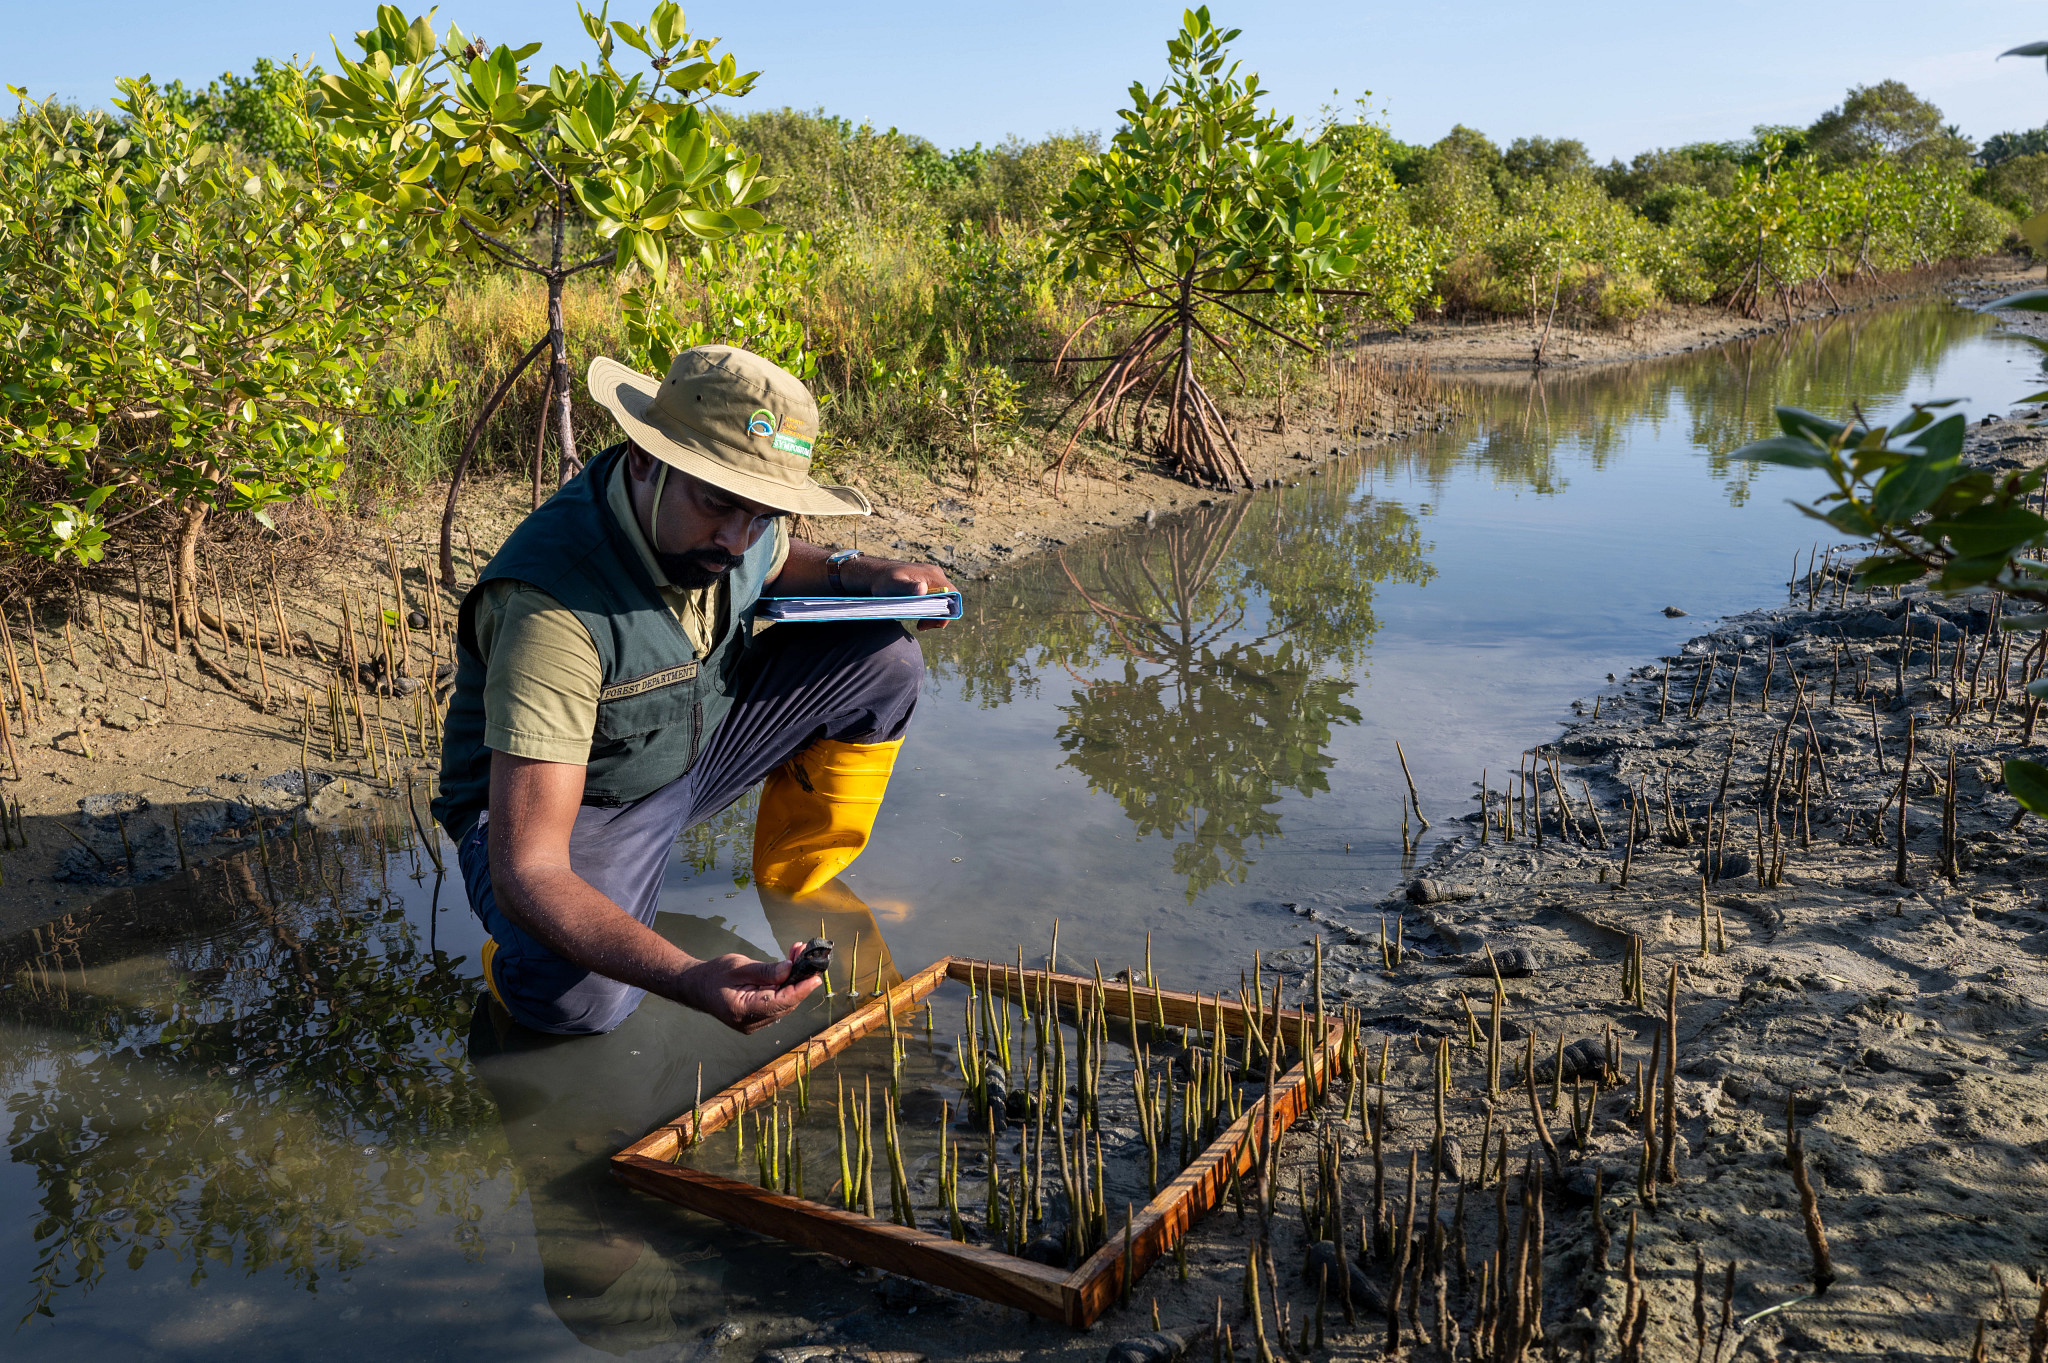 Sri Lankan initiative to expand its mangrove forests by over 50% recognized as one of seven UN World Restoration Flagships